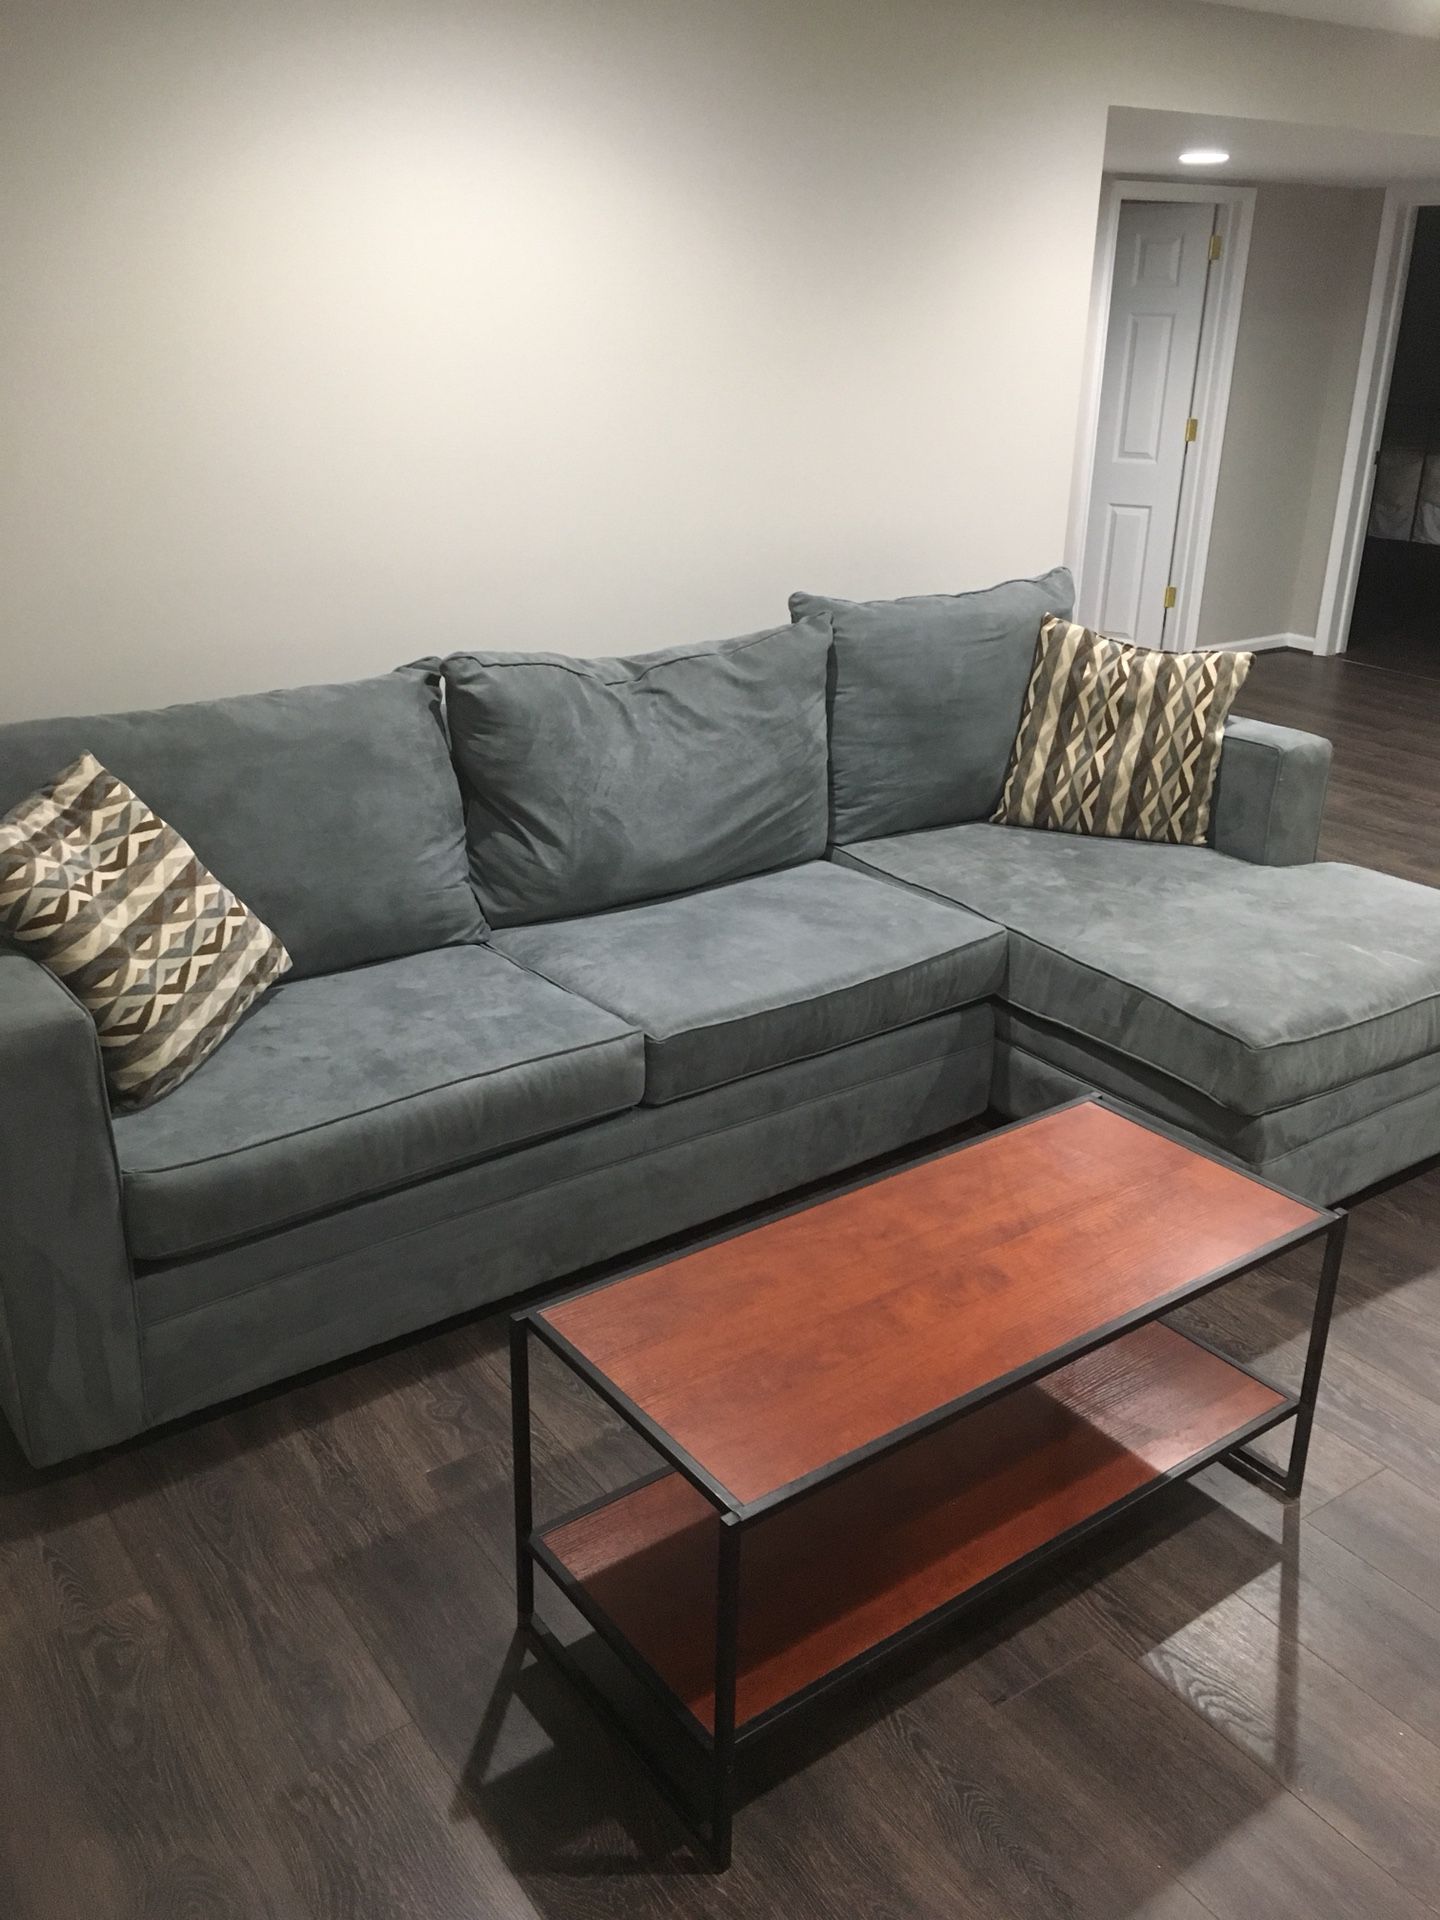 Sofa/ couch and coffee table